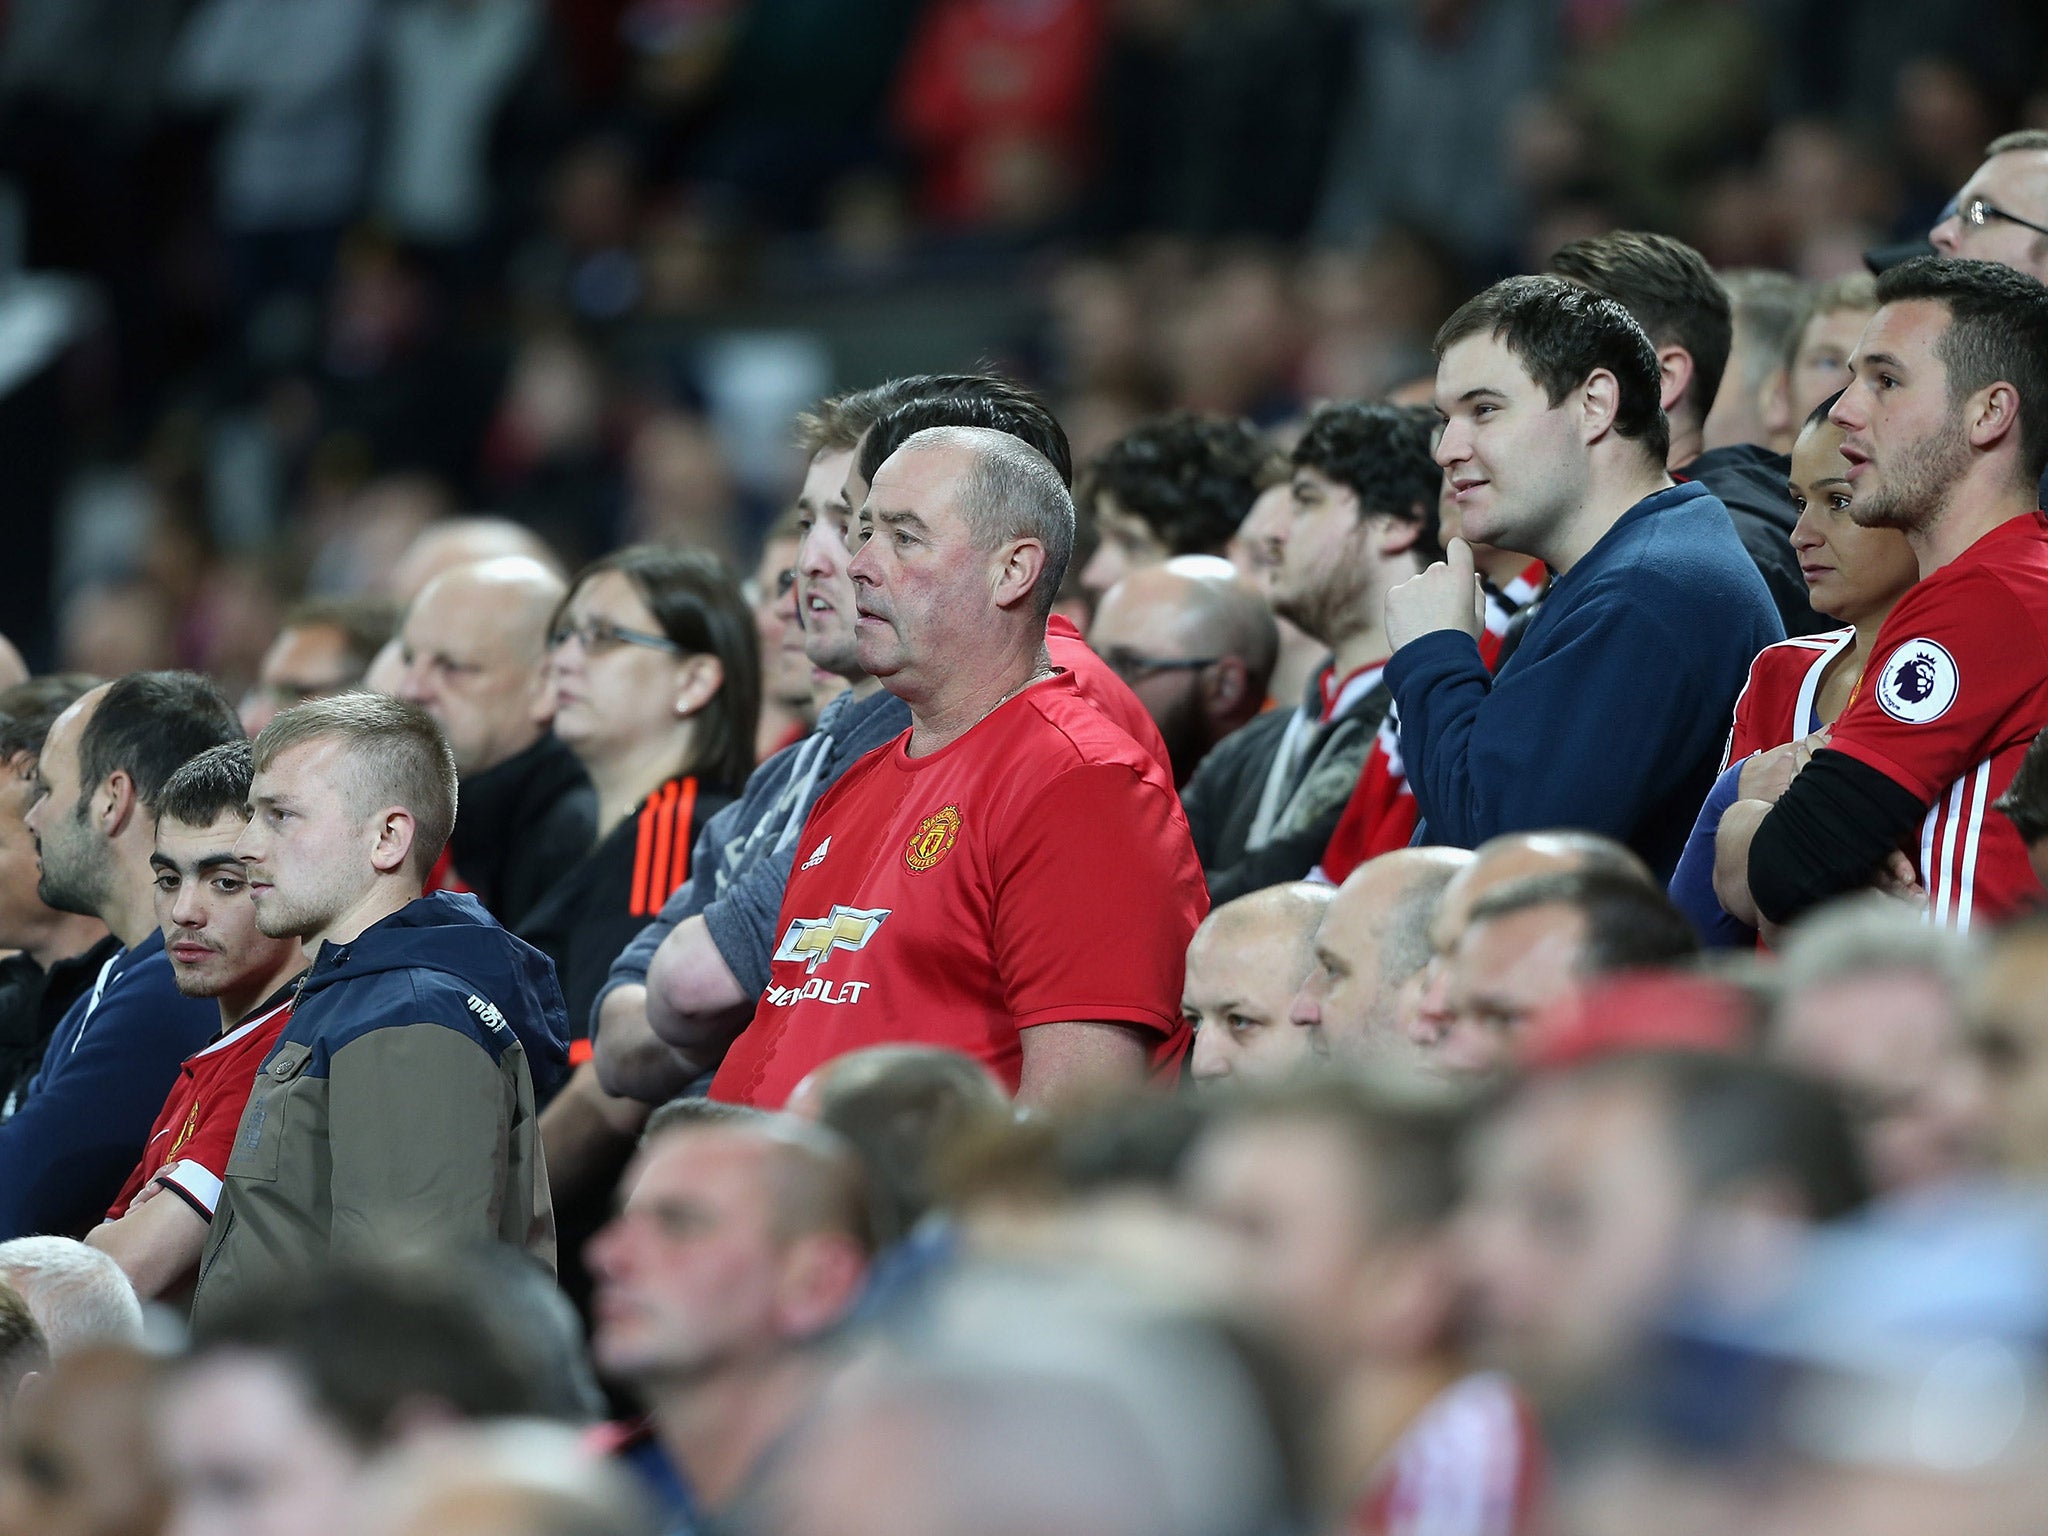 A Manchester United fan has been banned for 12 months for missing an away match